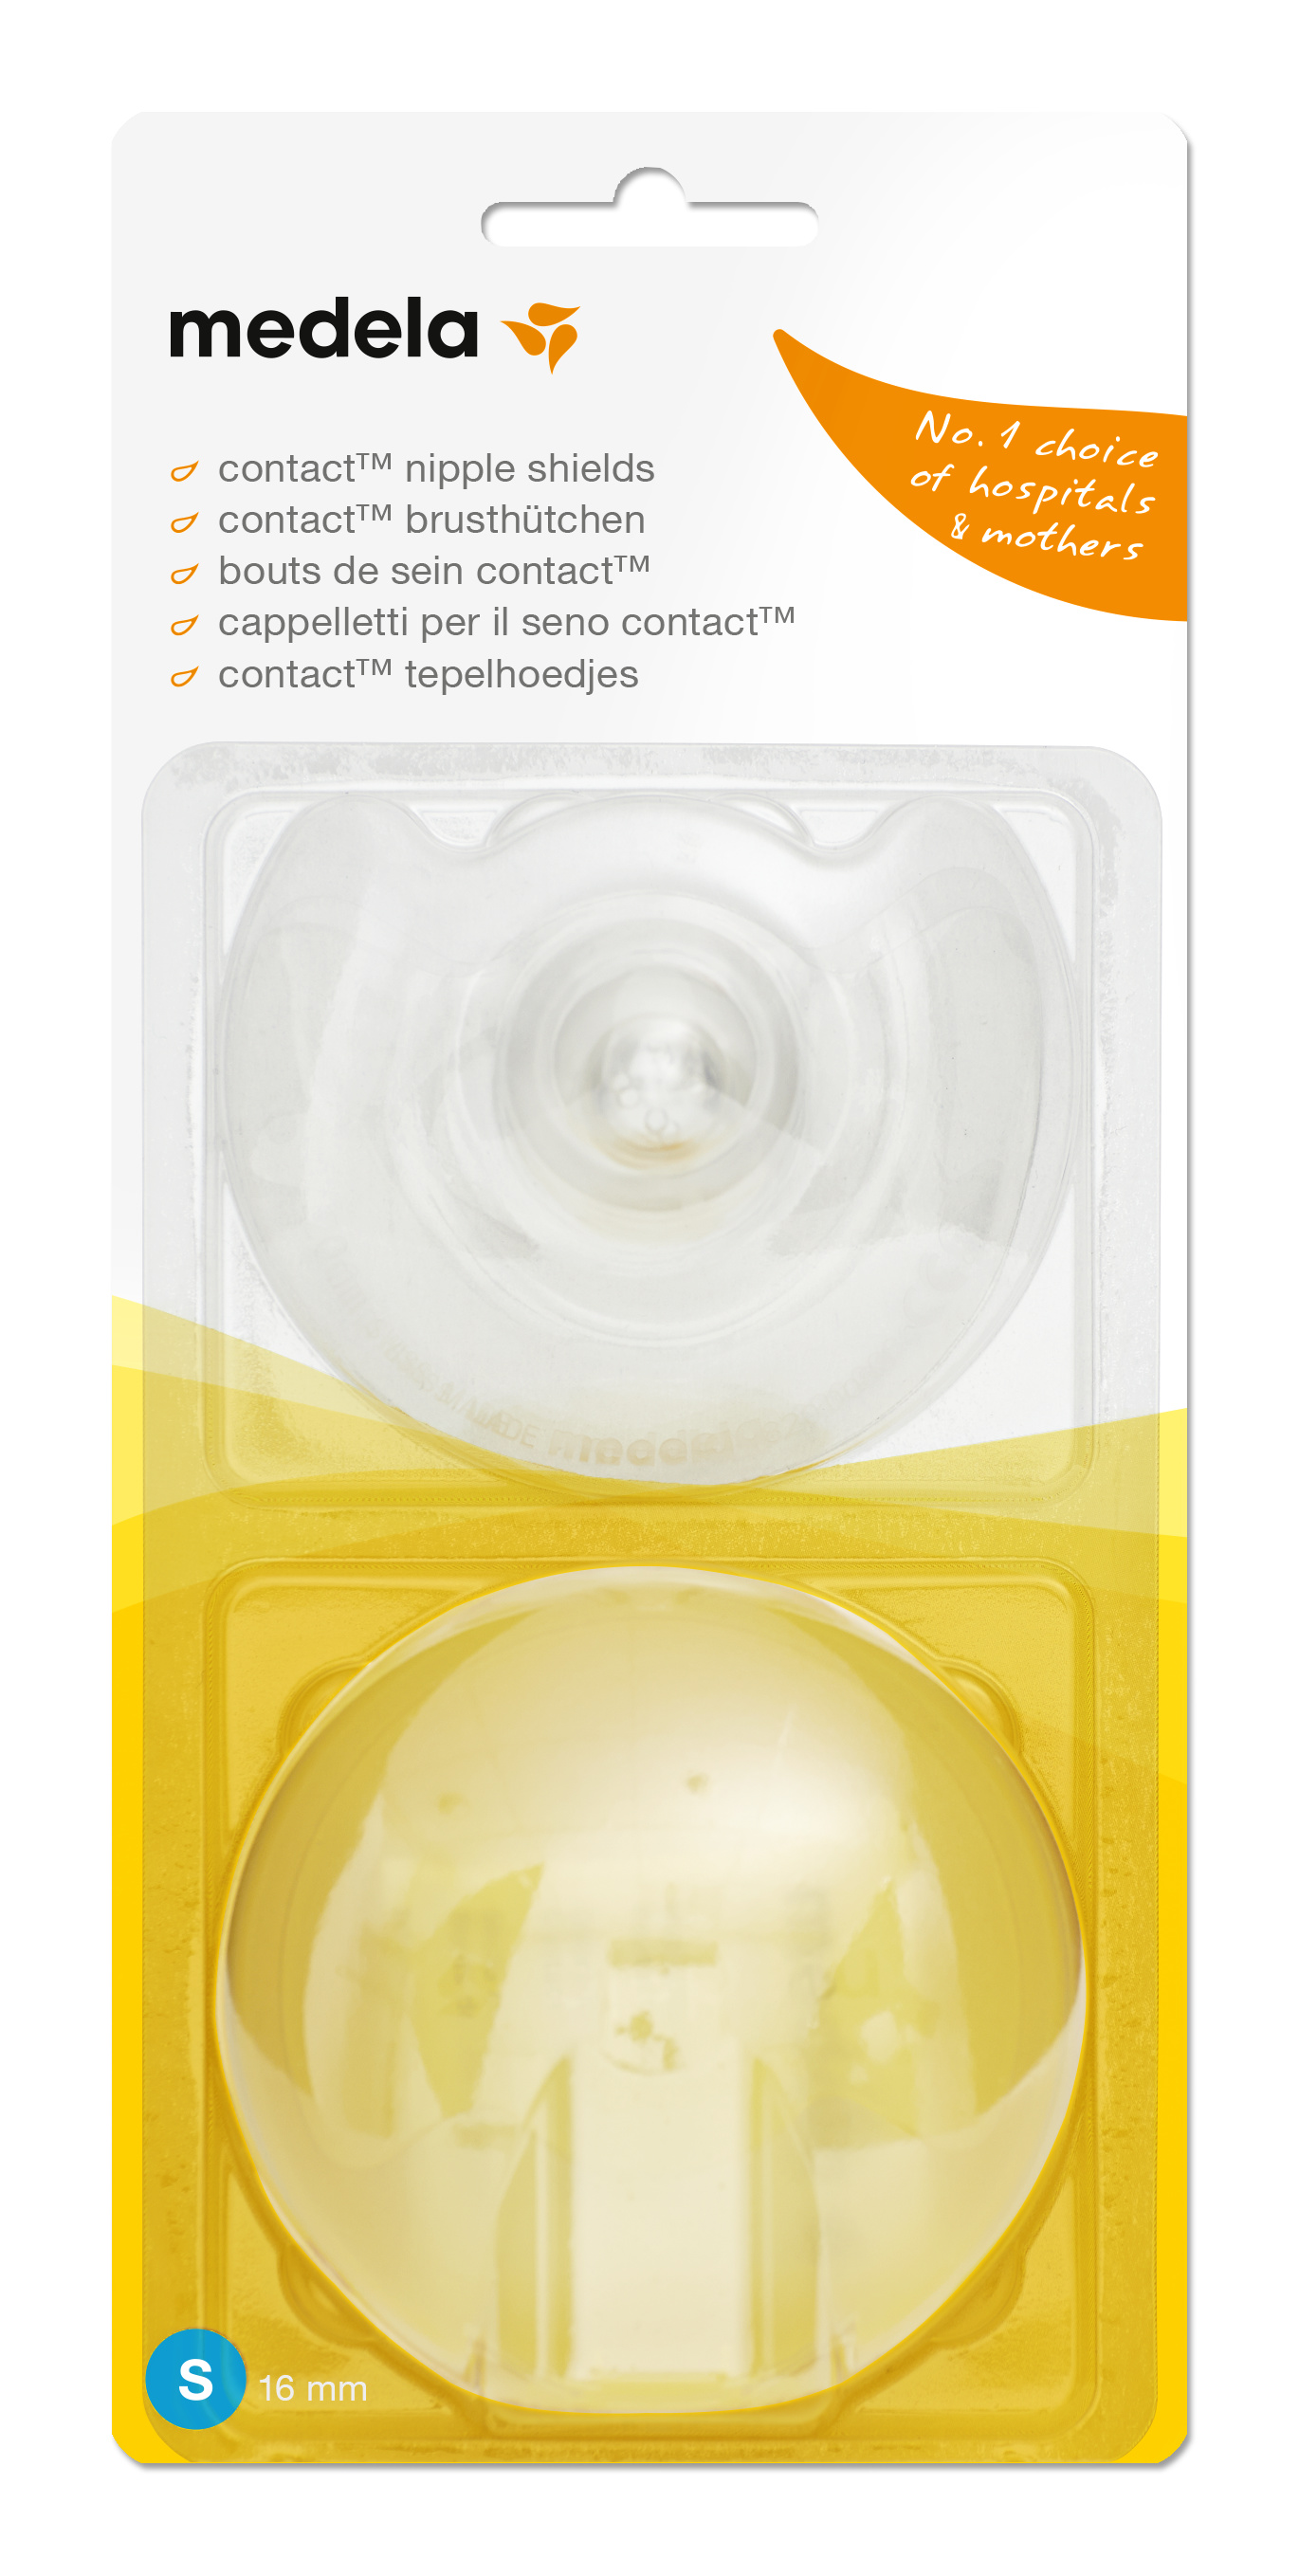 http://f.igtrend.kz/products/001/165/200_1610_packshot_contact_nipple_shields_s.jpg